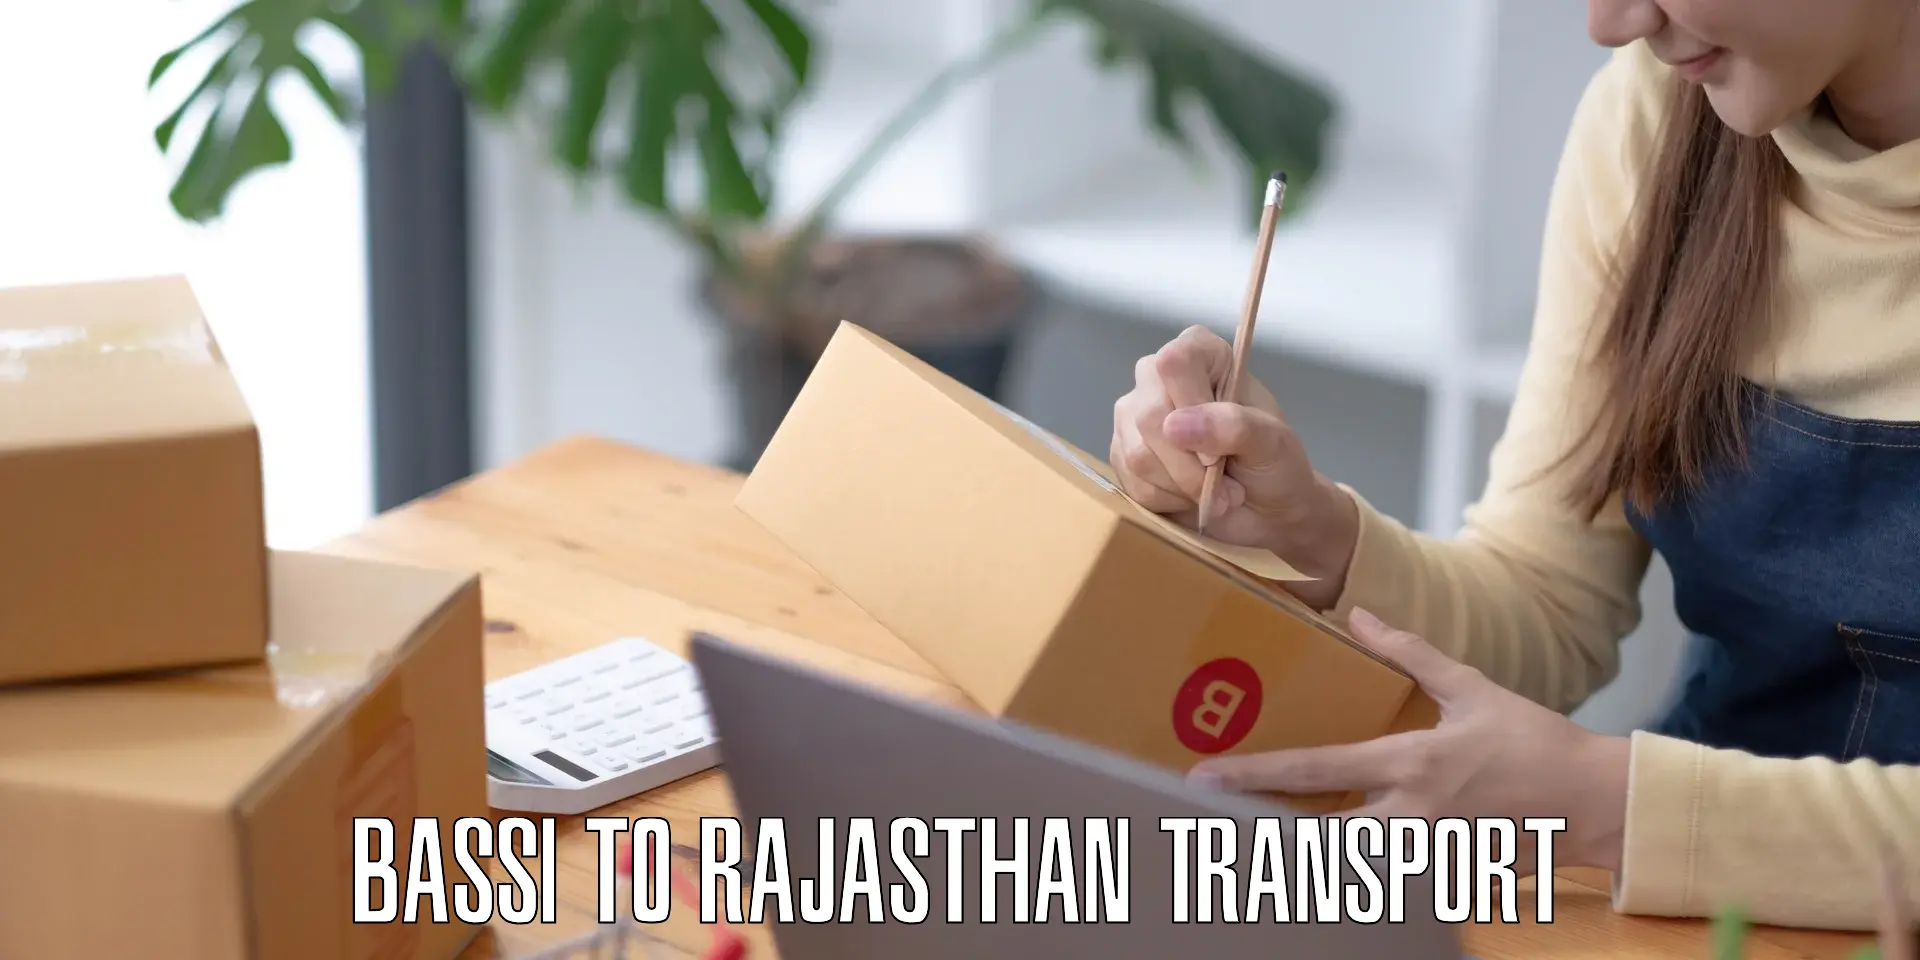 Container transport service Bassi to Bassi